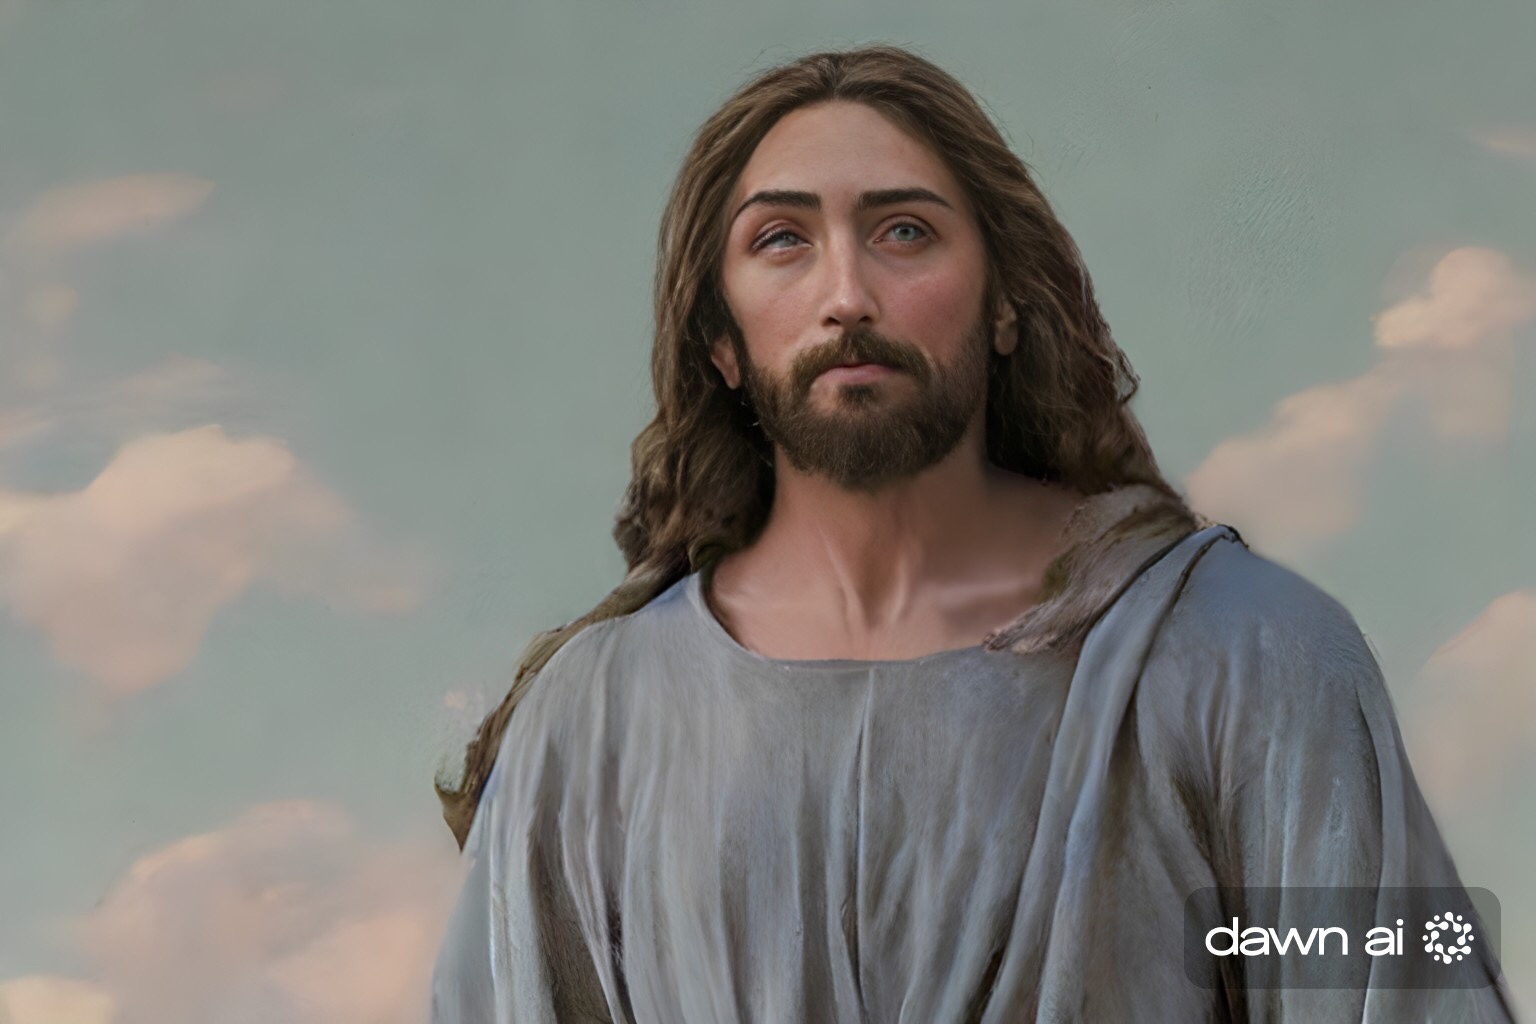 How To Be A Good Person According To Jesus Christ: